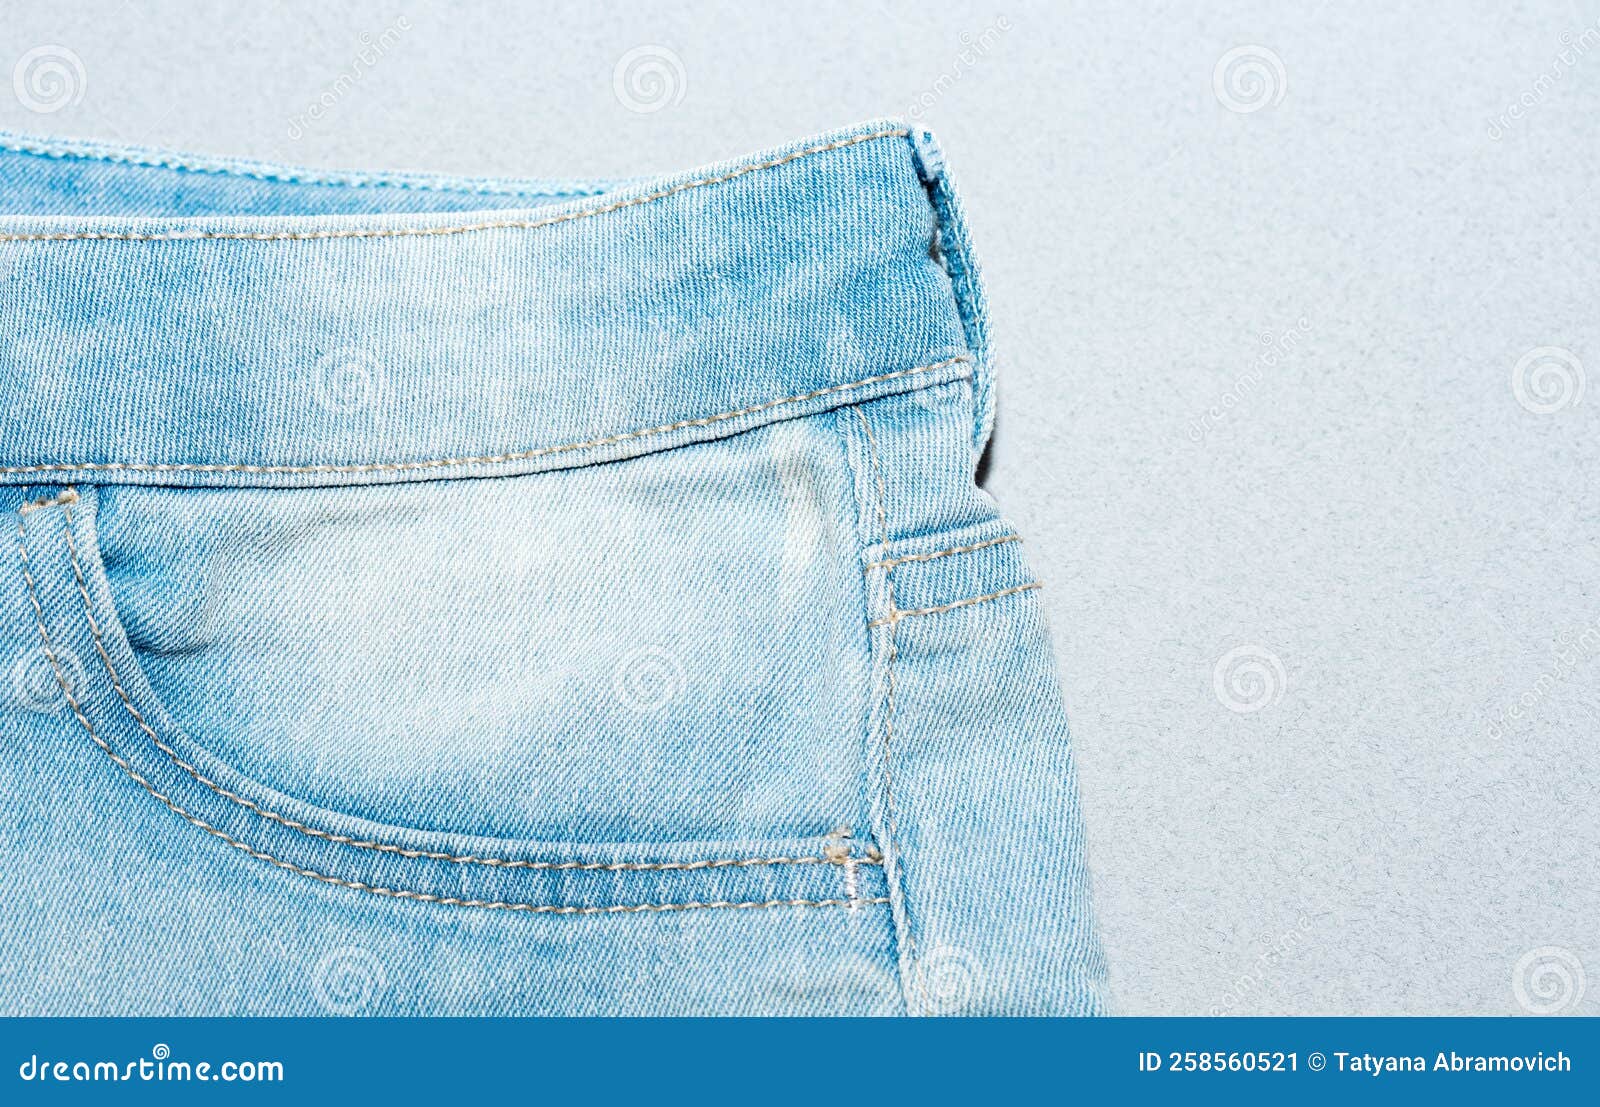 Printed Denim Texture: Over 3,890 Royalty-Free Licensable Stock Photos |  Shutterstock